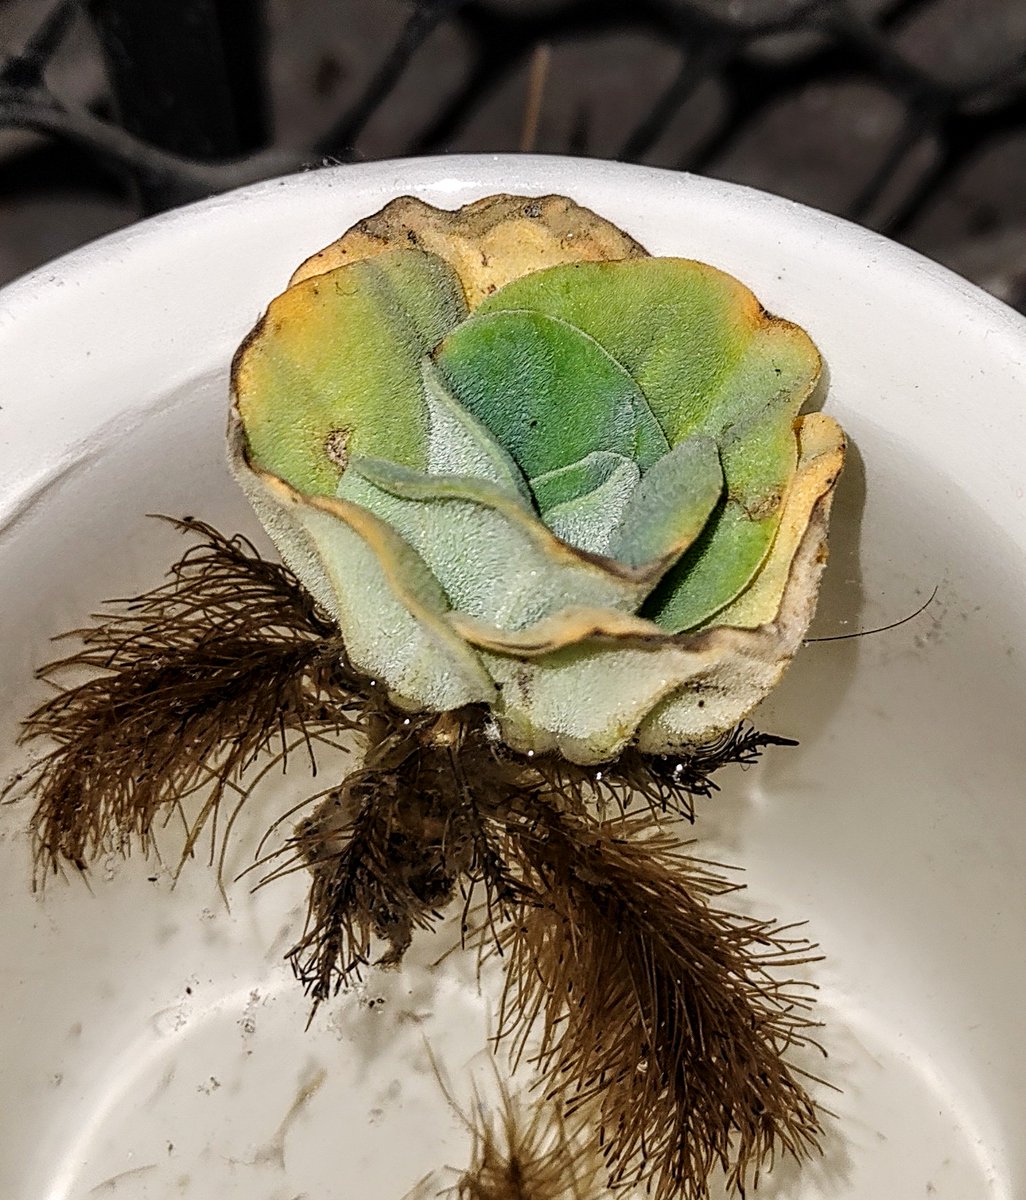  image of Roots of a lovely looking succulent